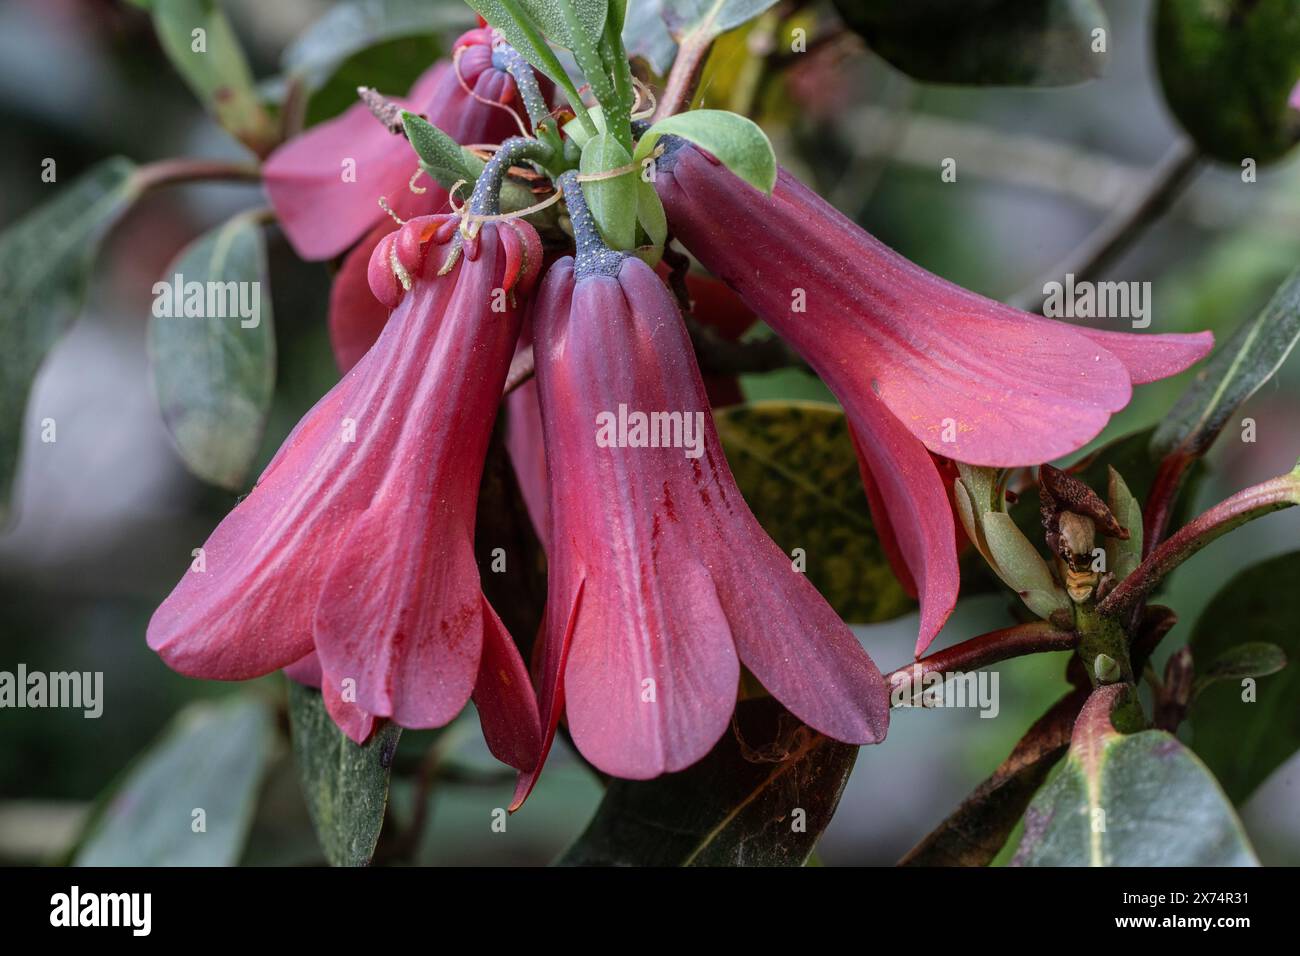 Rhododendron blossoms (Rhododendron cinnabarinum Roylei), Emsland, Lower Saxony, Germany, Europe Stock Photo